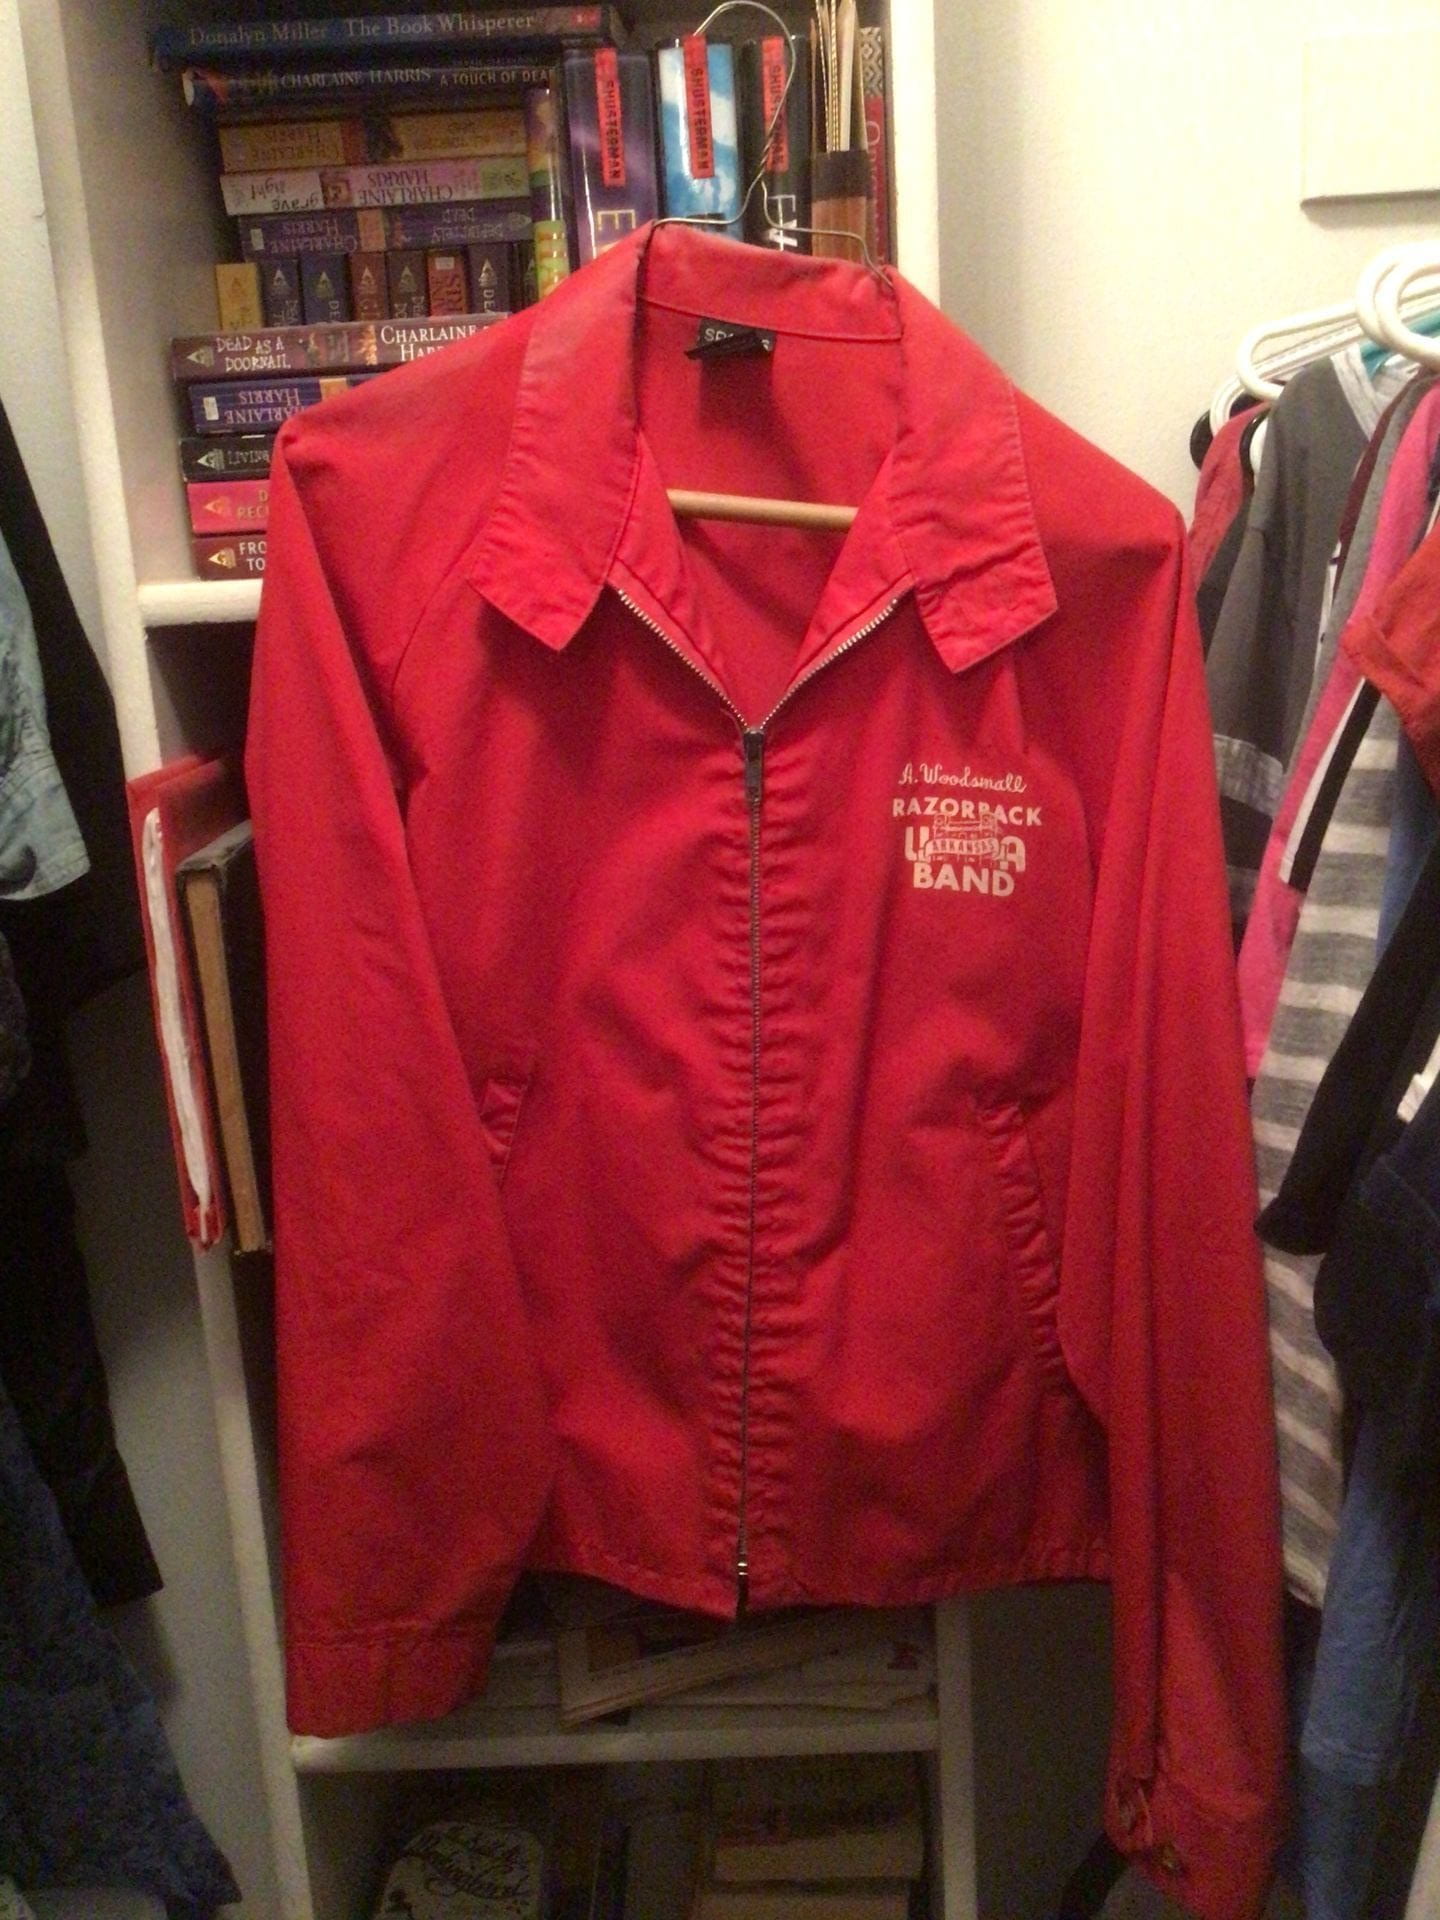 Red jacket with letters engraved in white on left side that states 